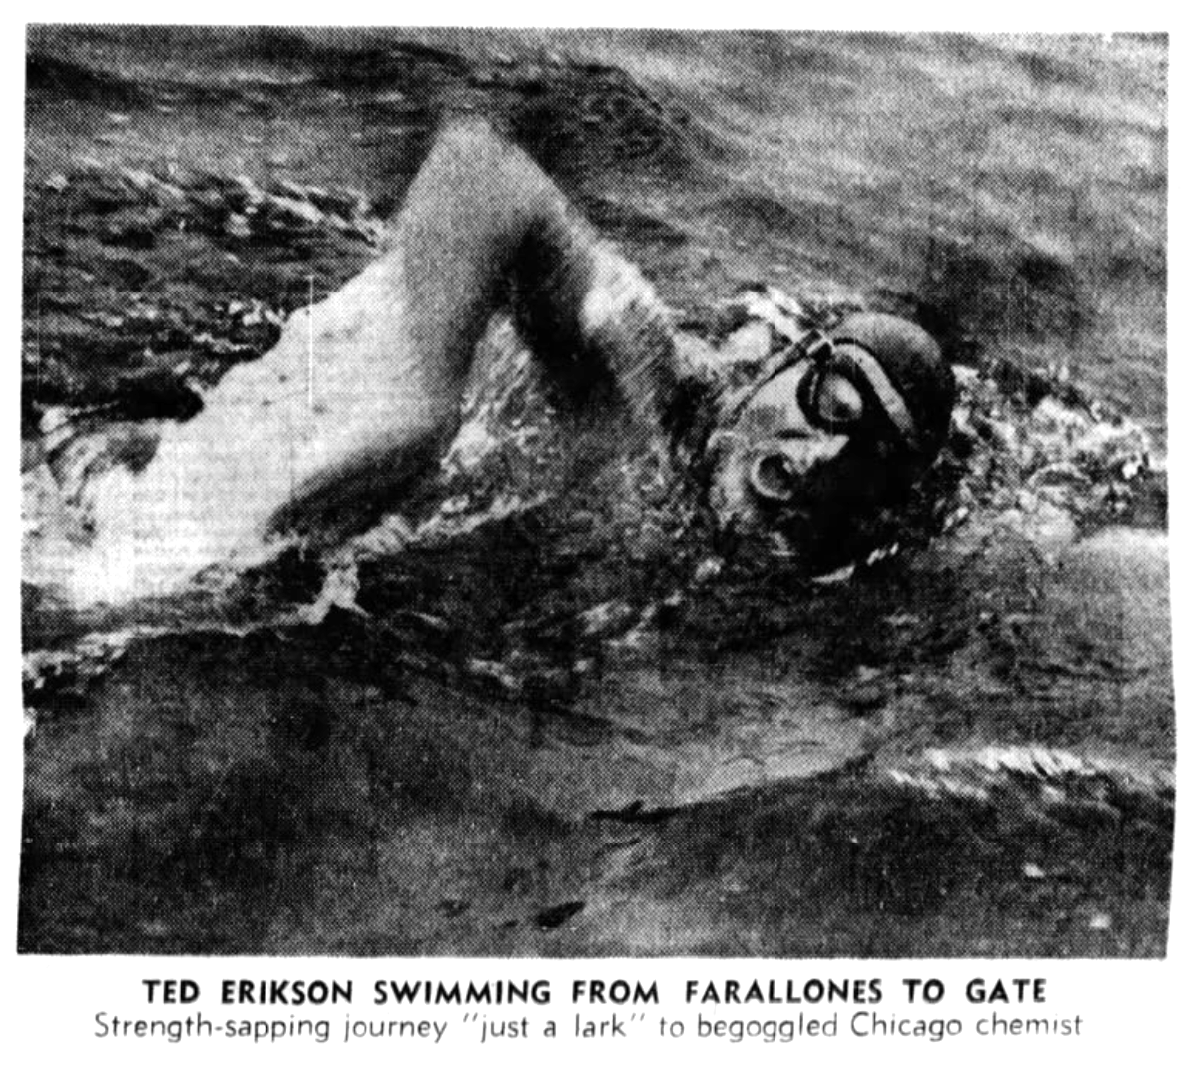 A man in 1960s-era swimming cap and goggles swims aggressively in the ocean.